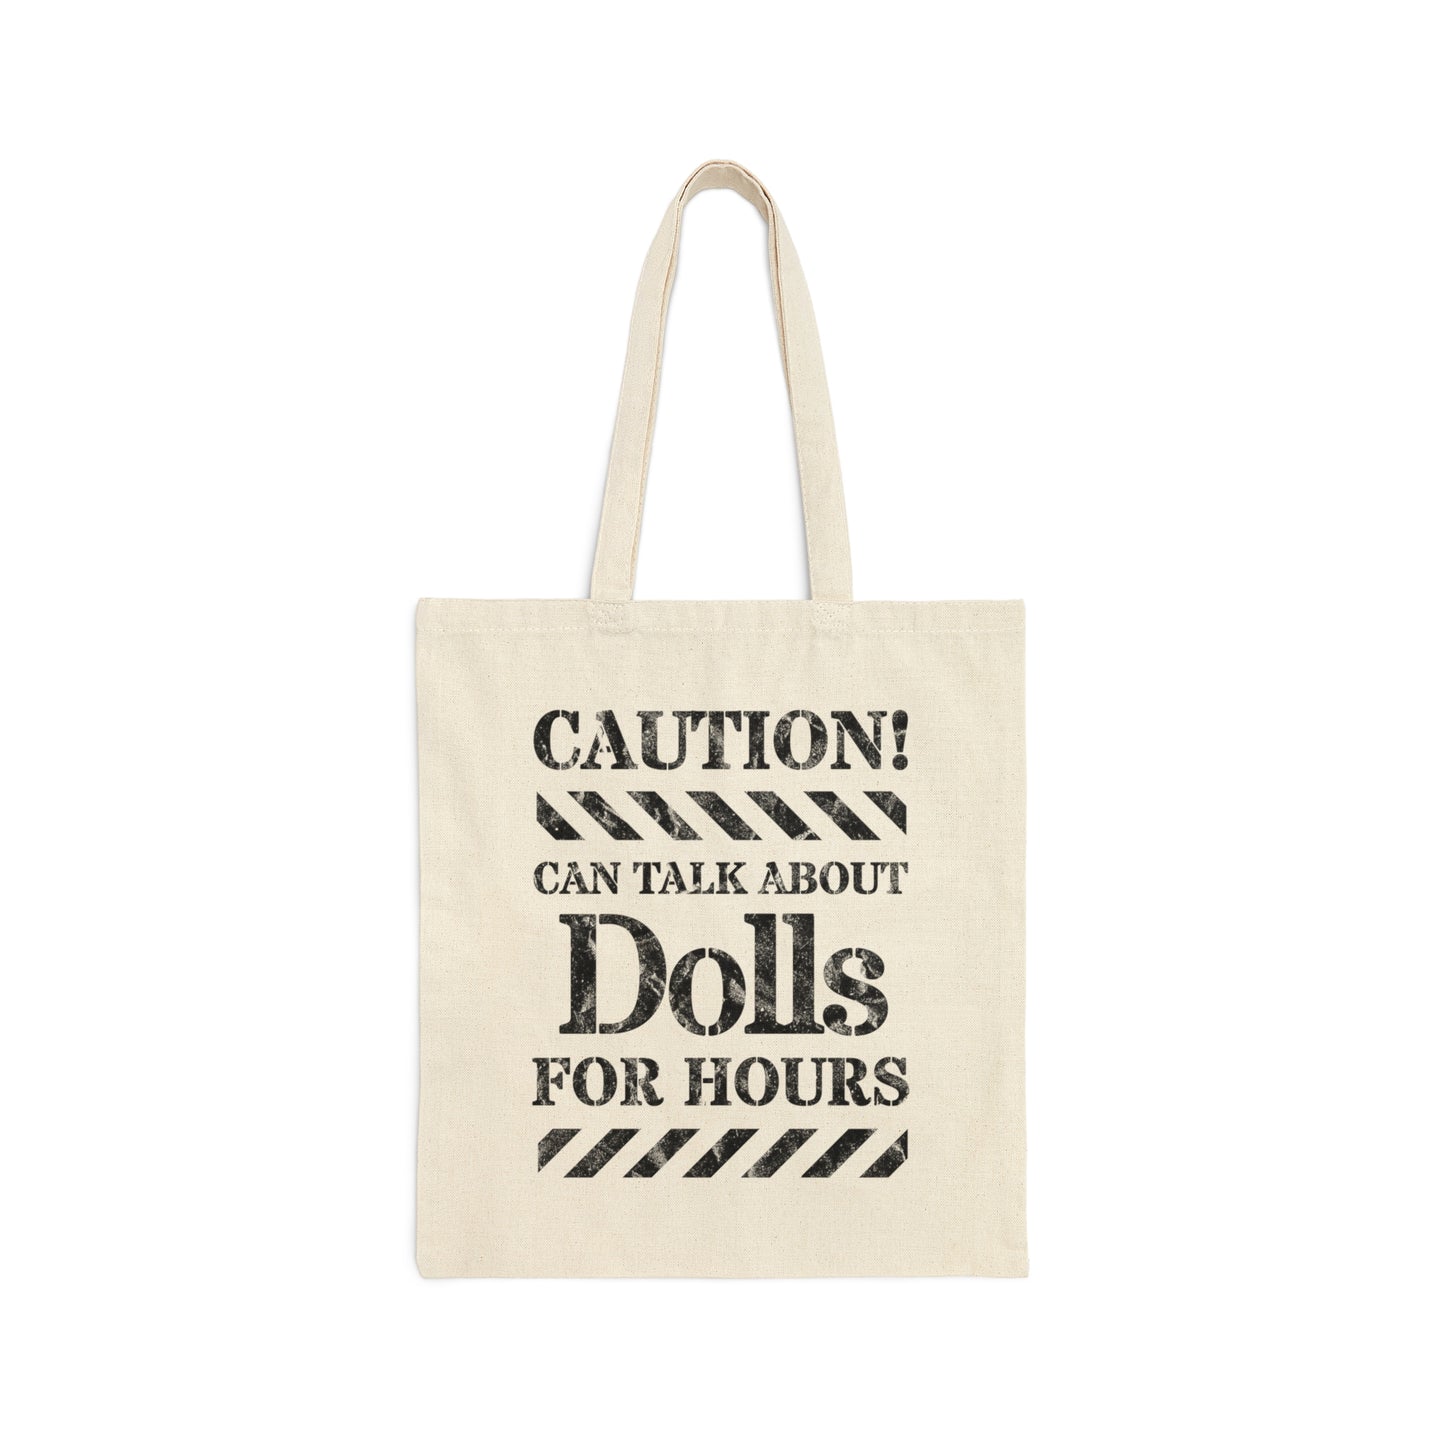 Caution! Can Talk About Dolls For Hours Cotton Canvas Tote Bag